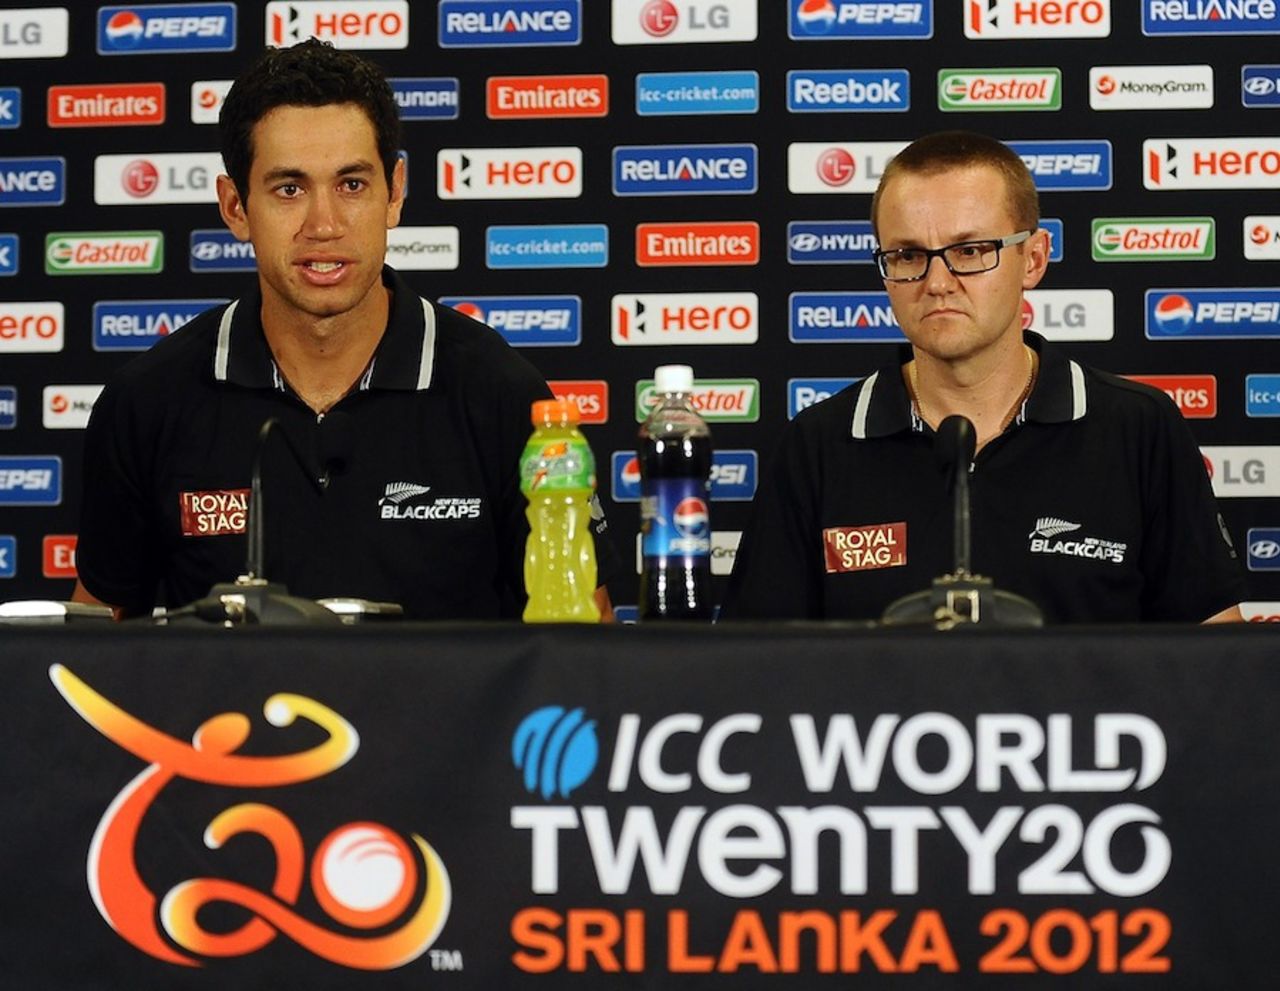 Ross Taylor and Mike Hesson, New Zealand's captain and coach, at a press conference, Colombo, World Twenty20 2012, September 13, 2012